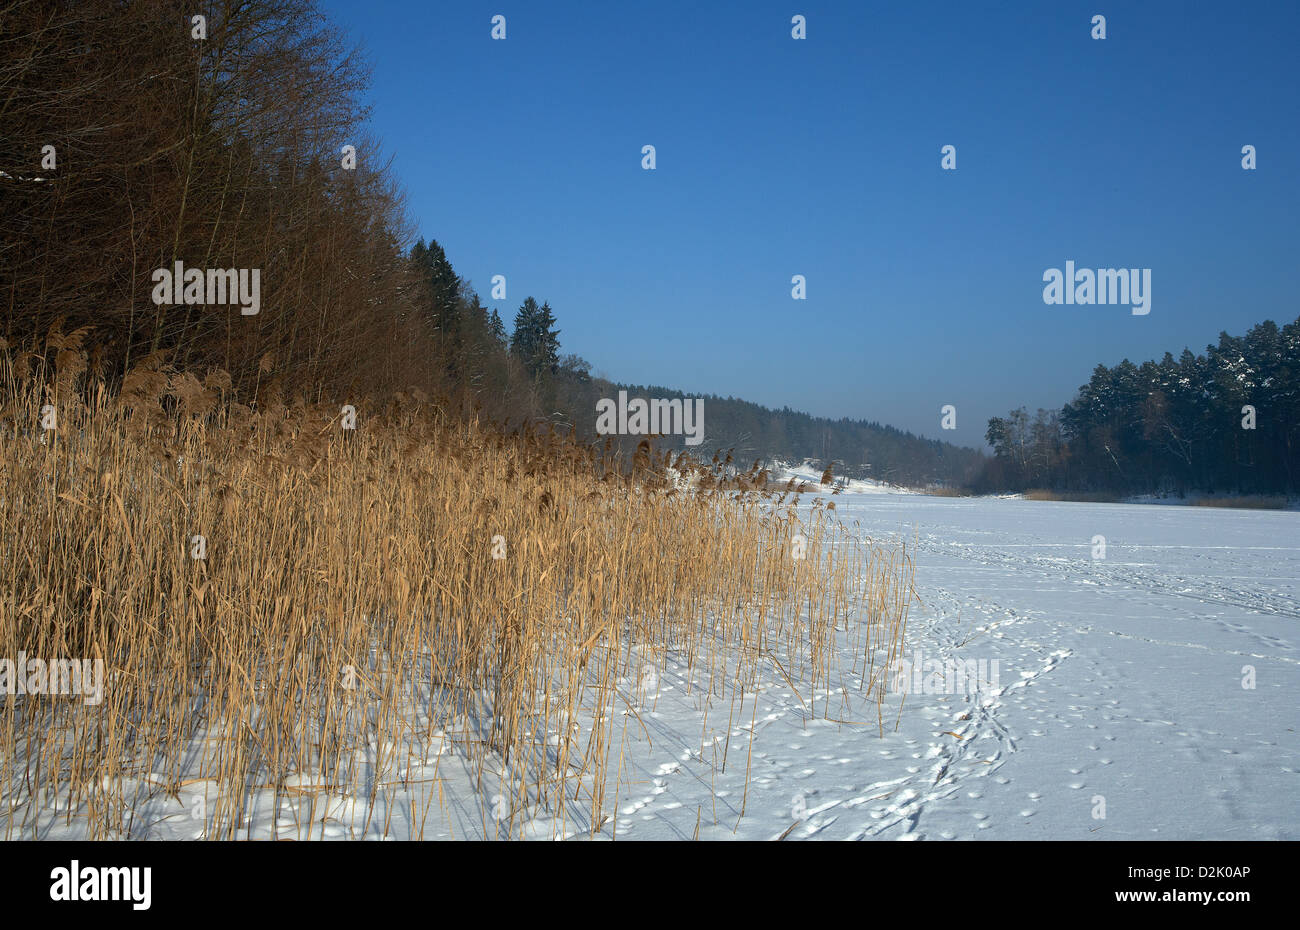 Tiefensee, Germany, frozen Gamensee with snowy landscape Stock Photo